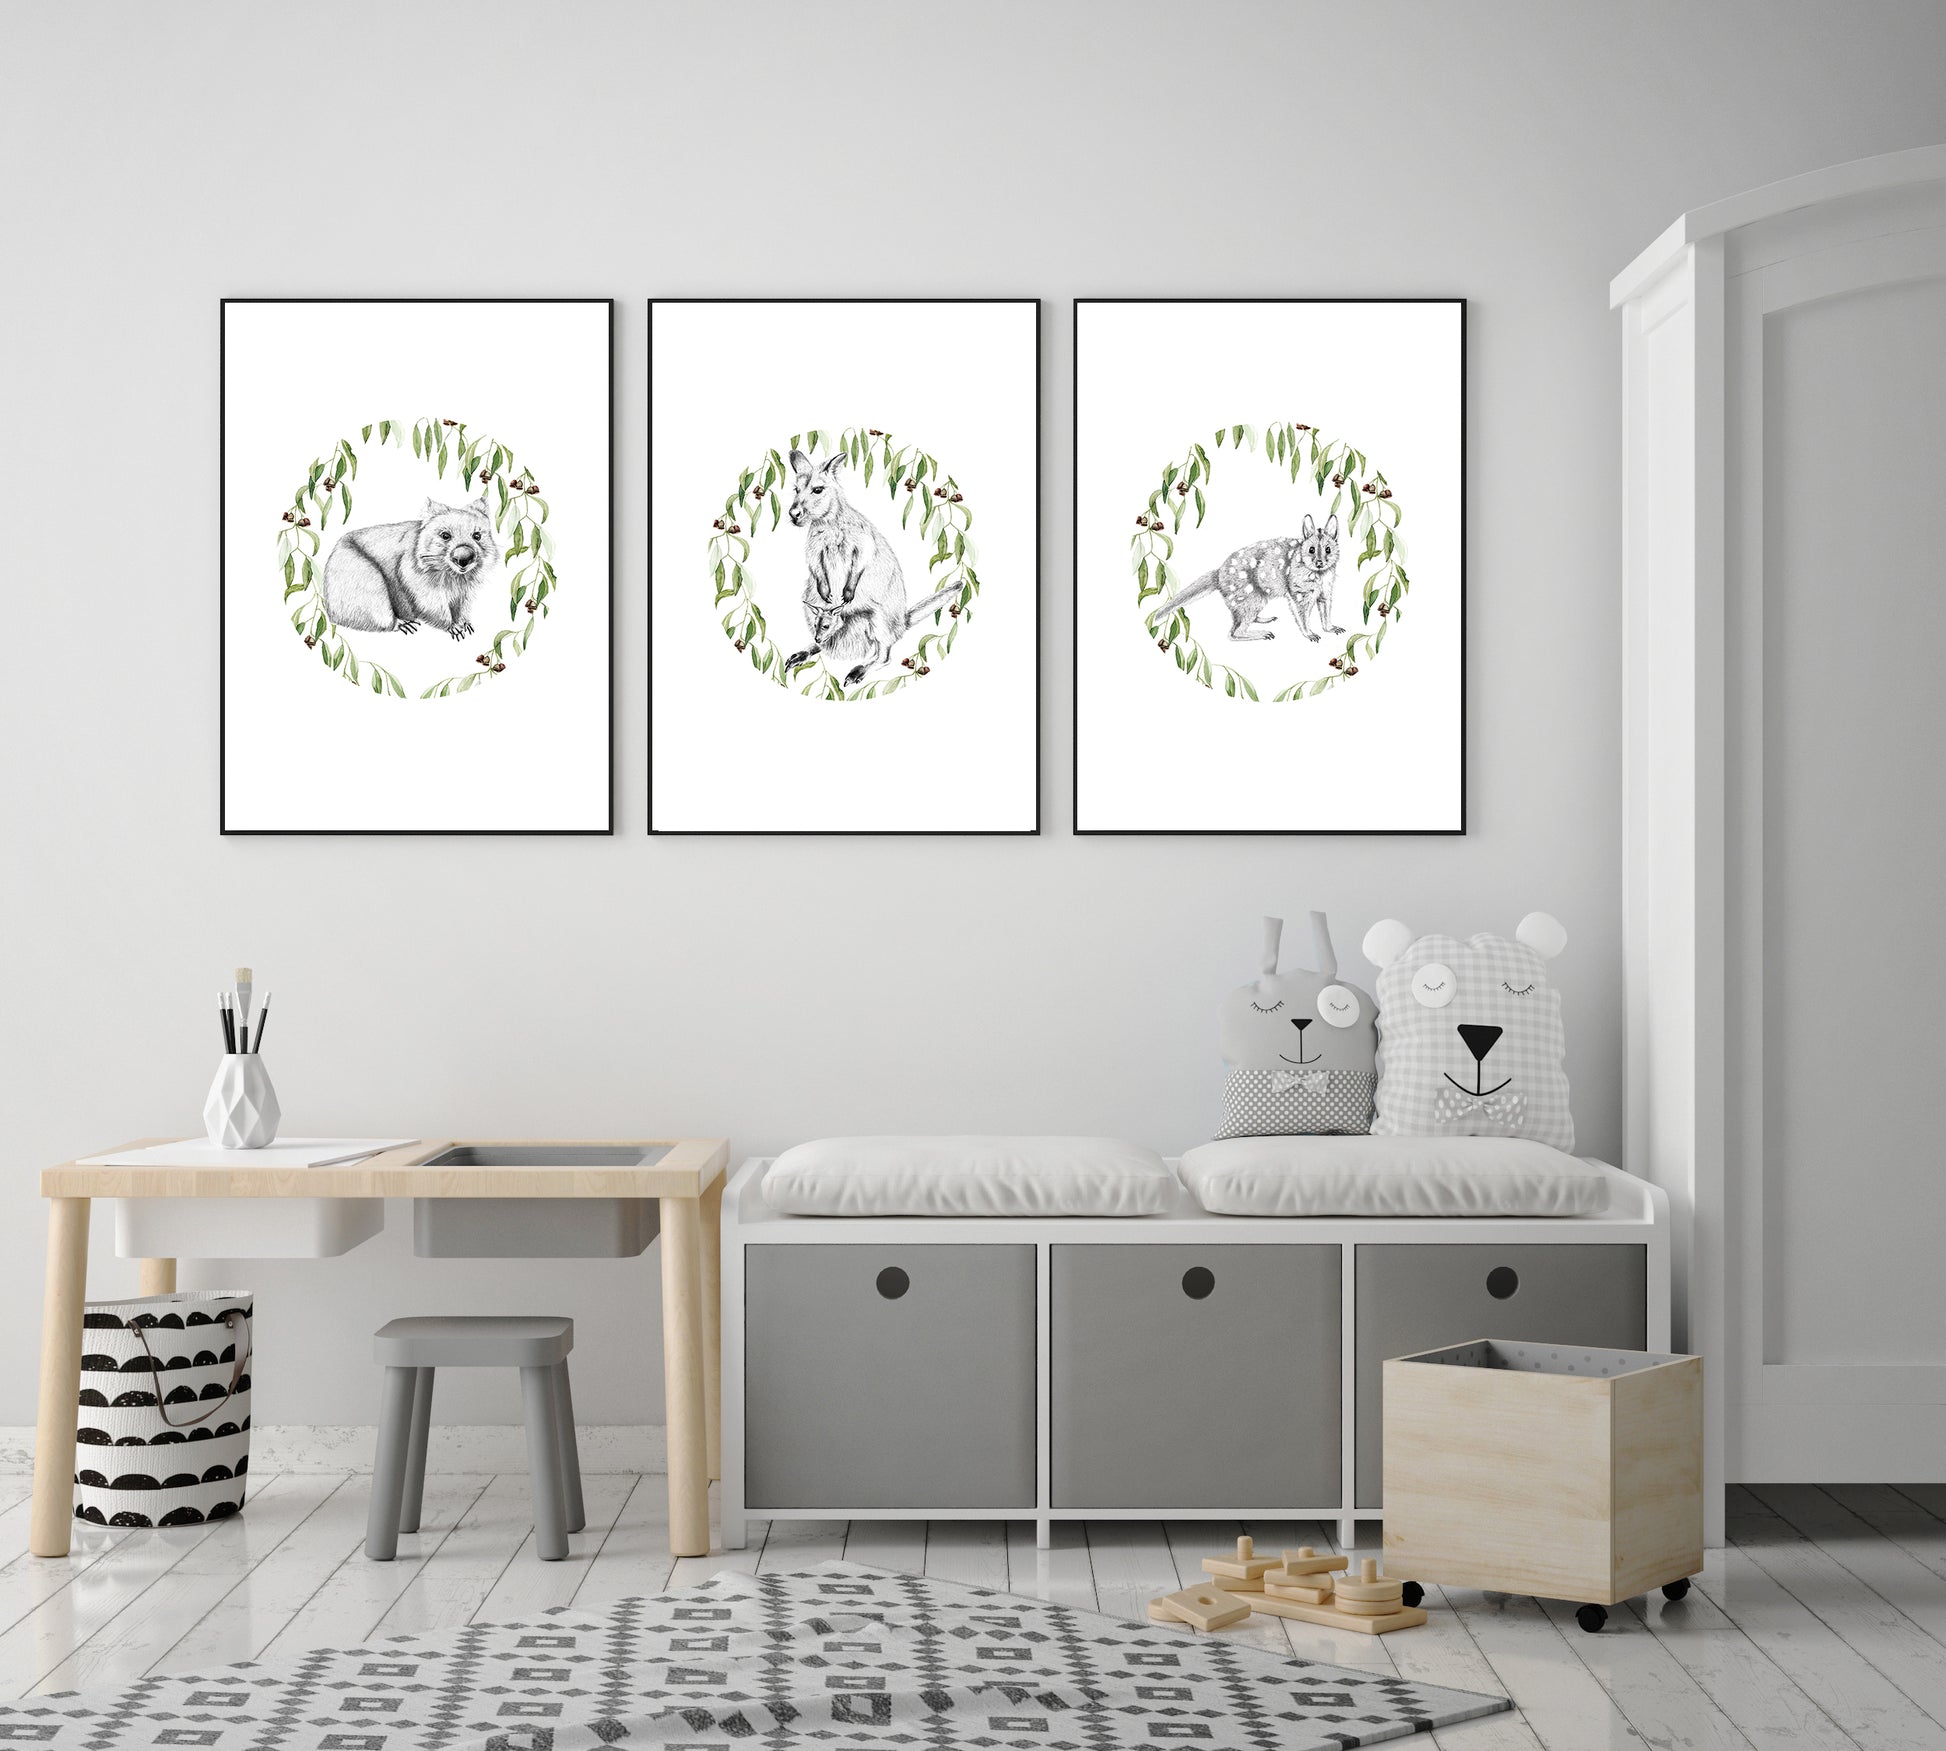 Set of 3 animal pencil drawings with watercolour gum leaf wreath